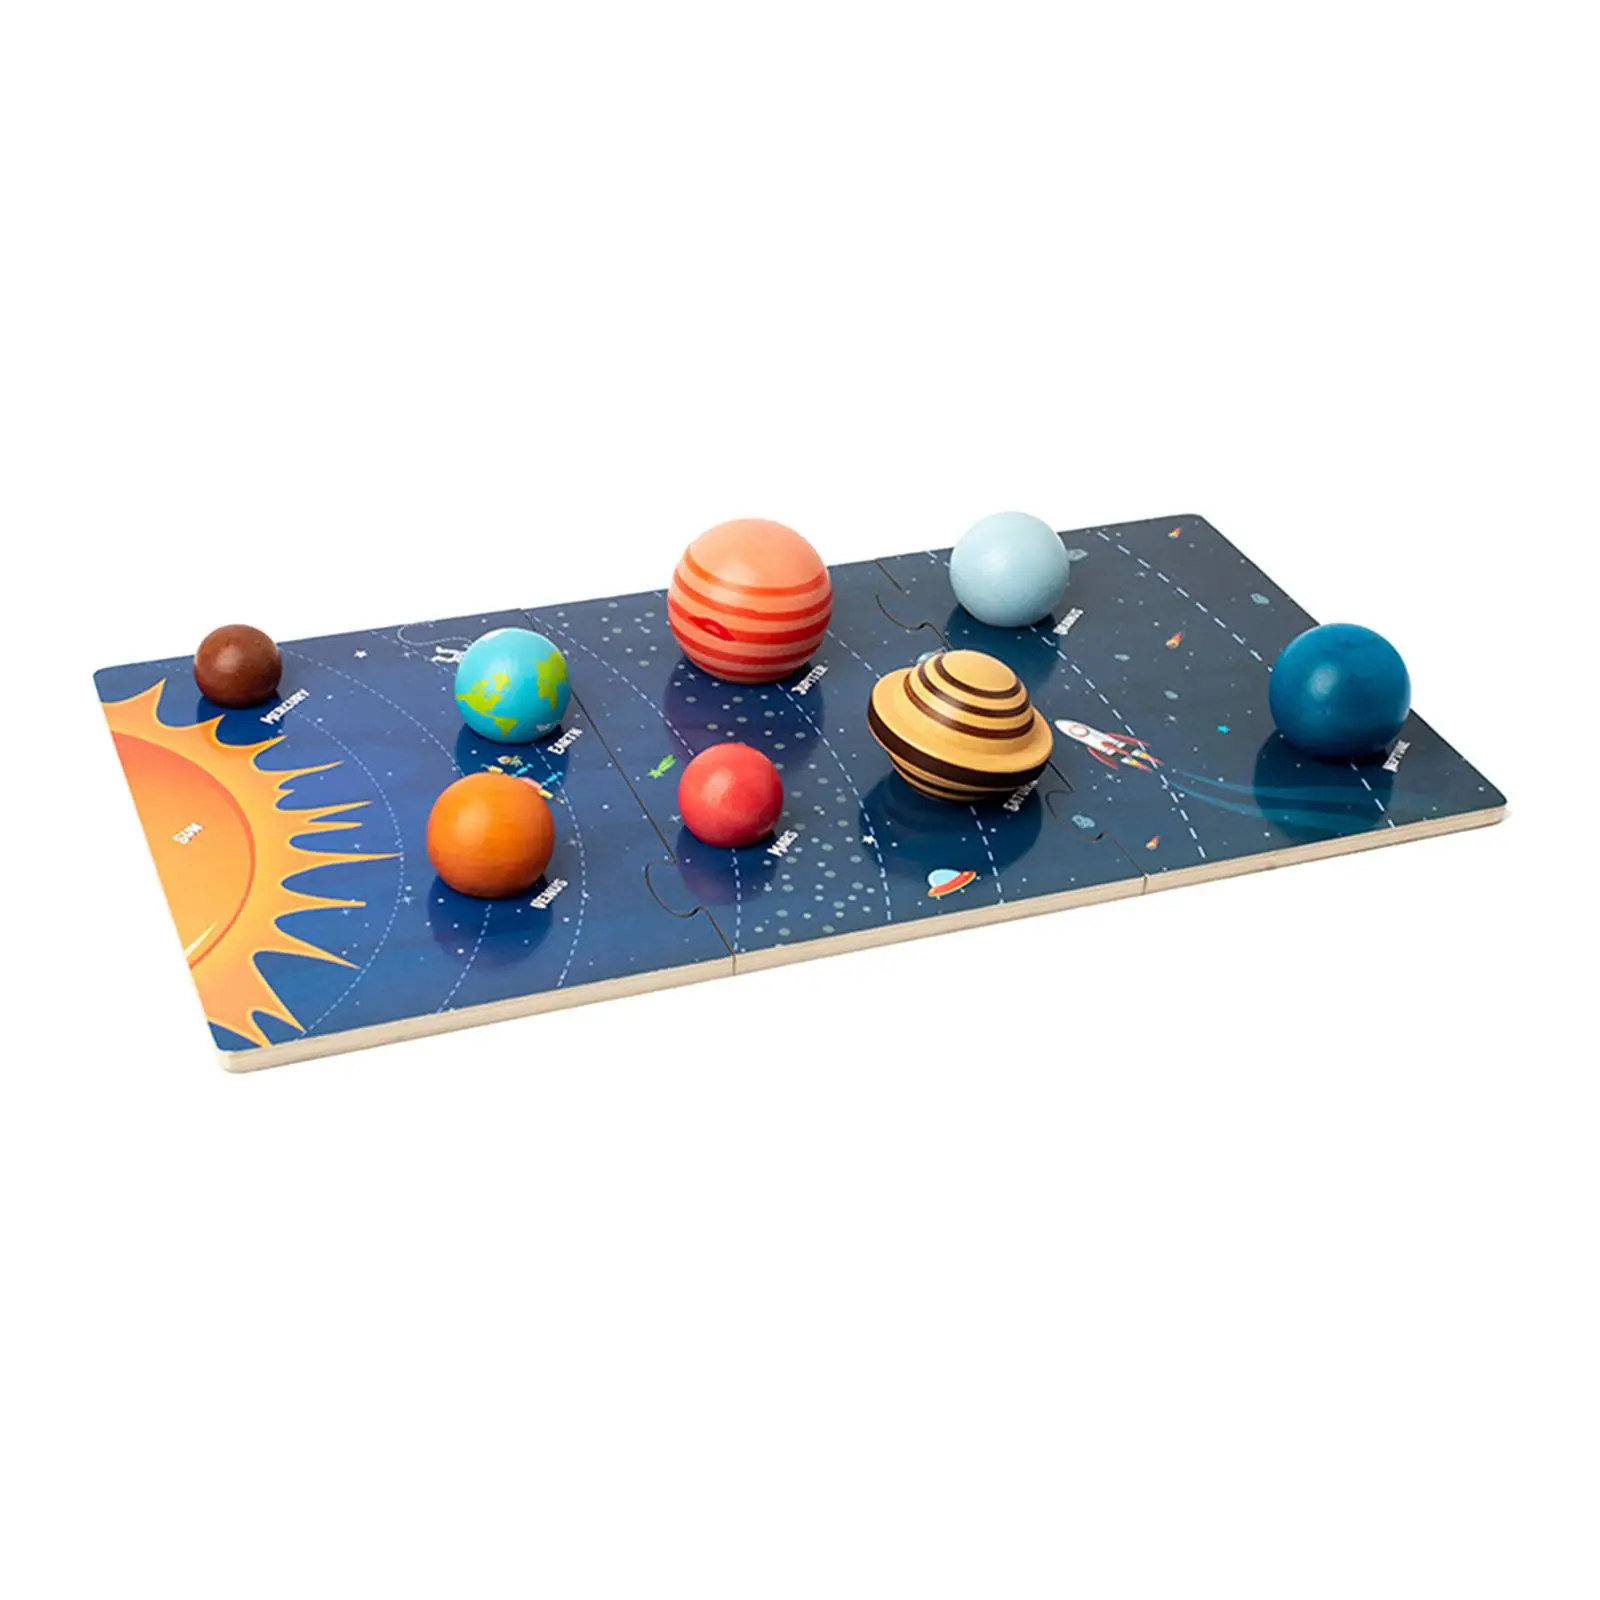 

Learning Education Toy Early Development and Activities Astronaut Thinking Solar System Puzzle for Education Learning Children